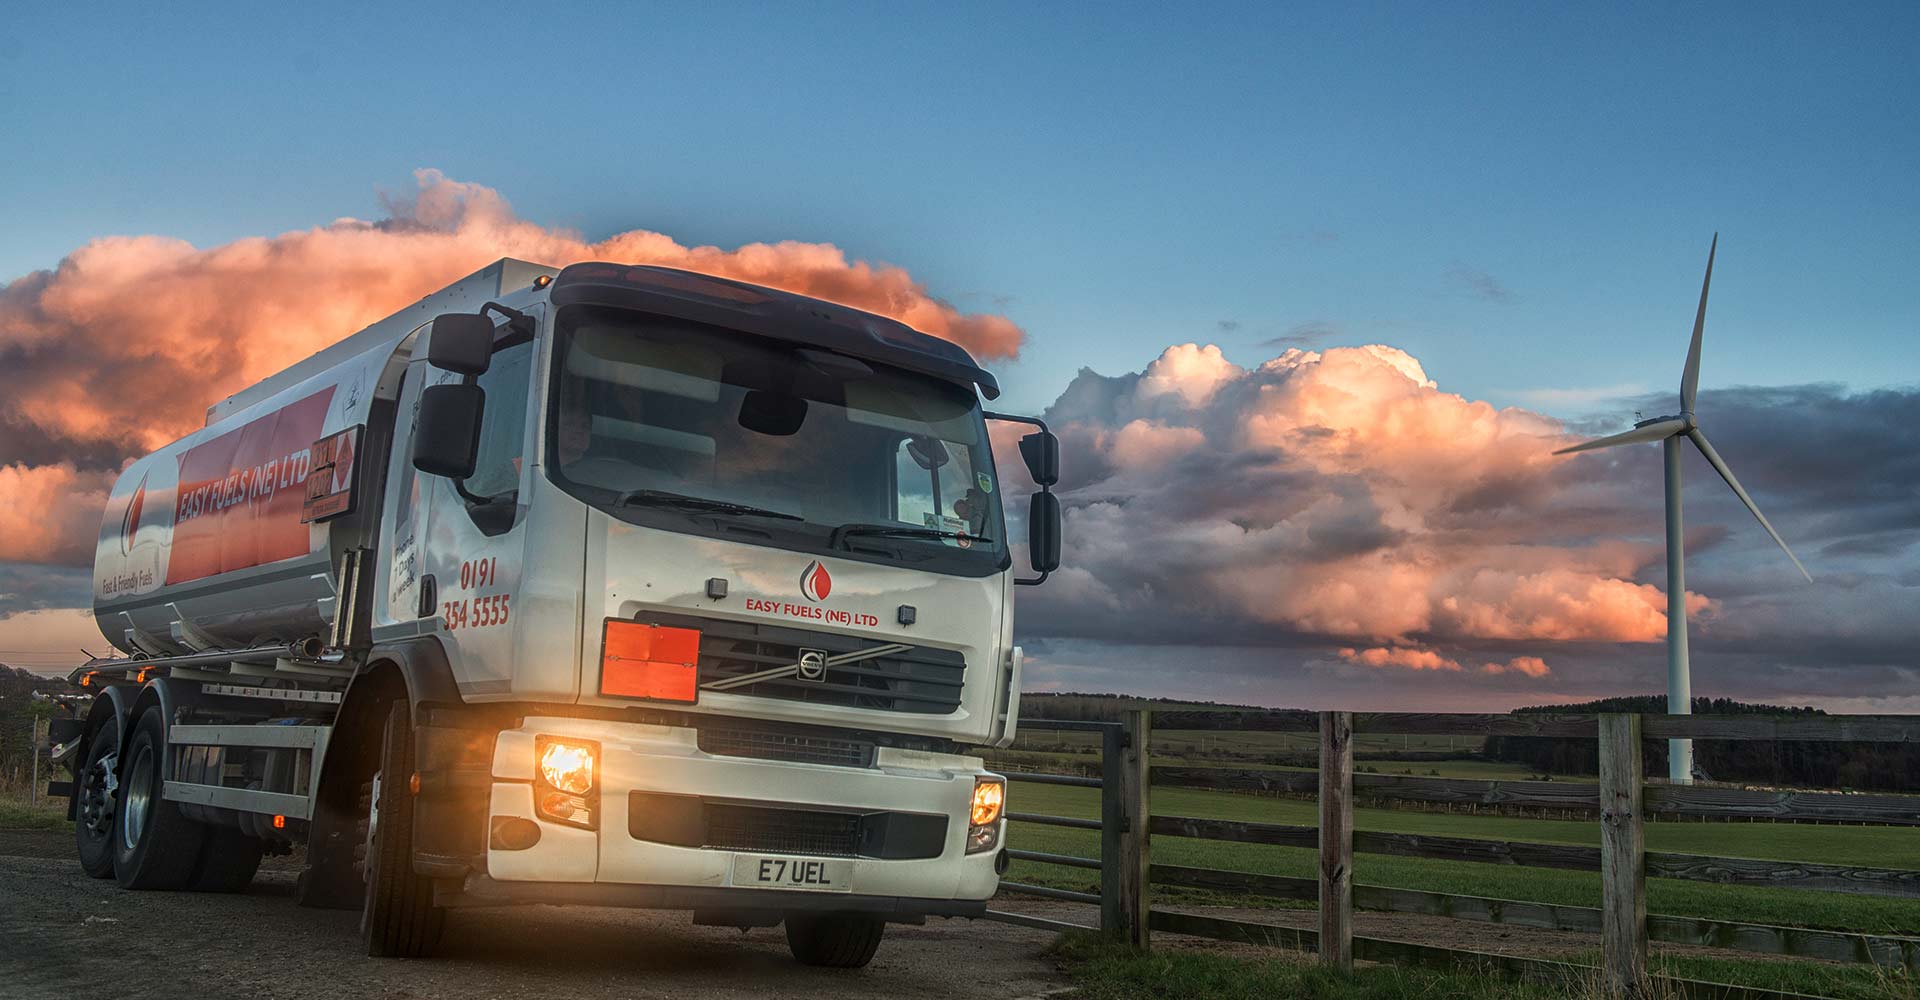 Heating Oil & Diesel Fuel Delivery in the North East UK